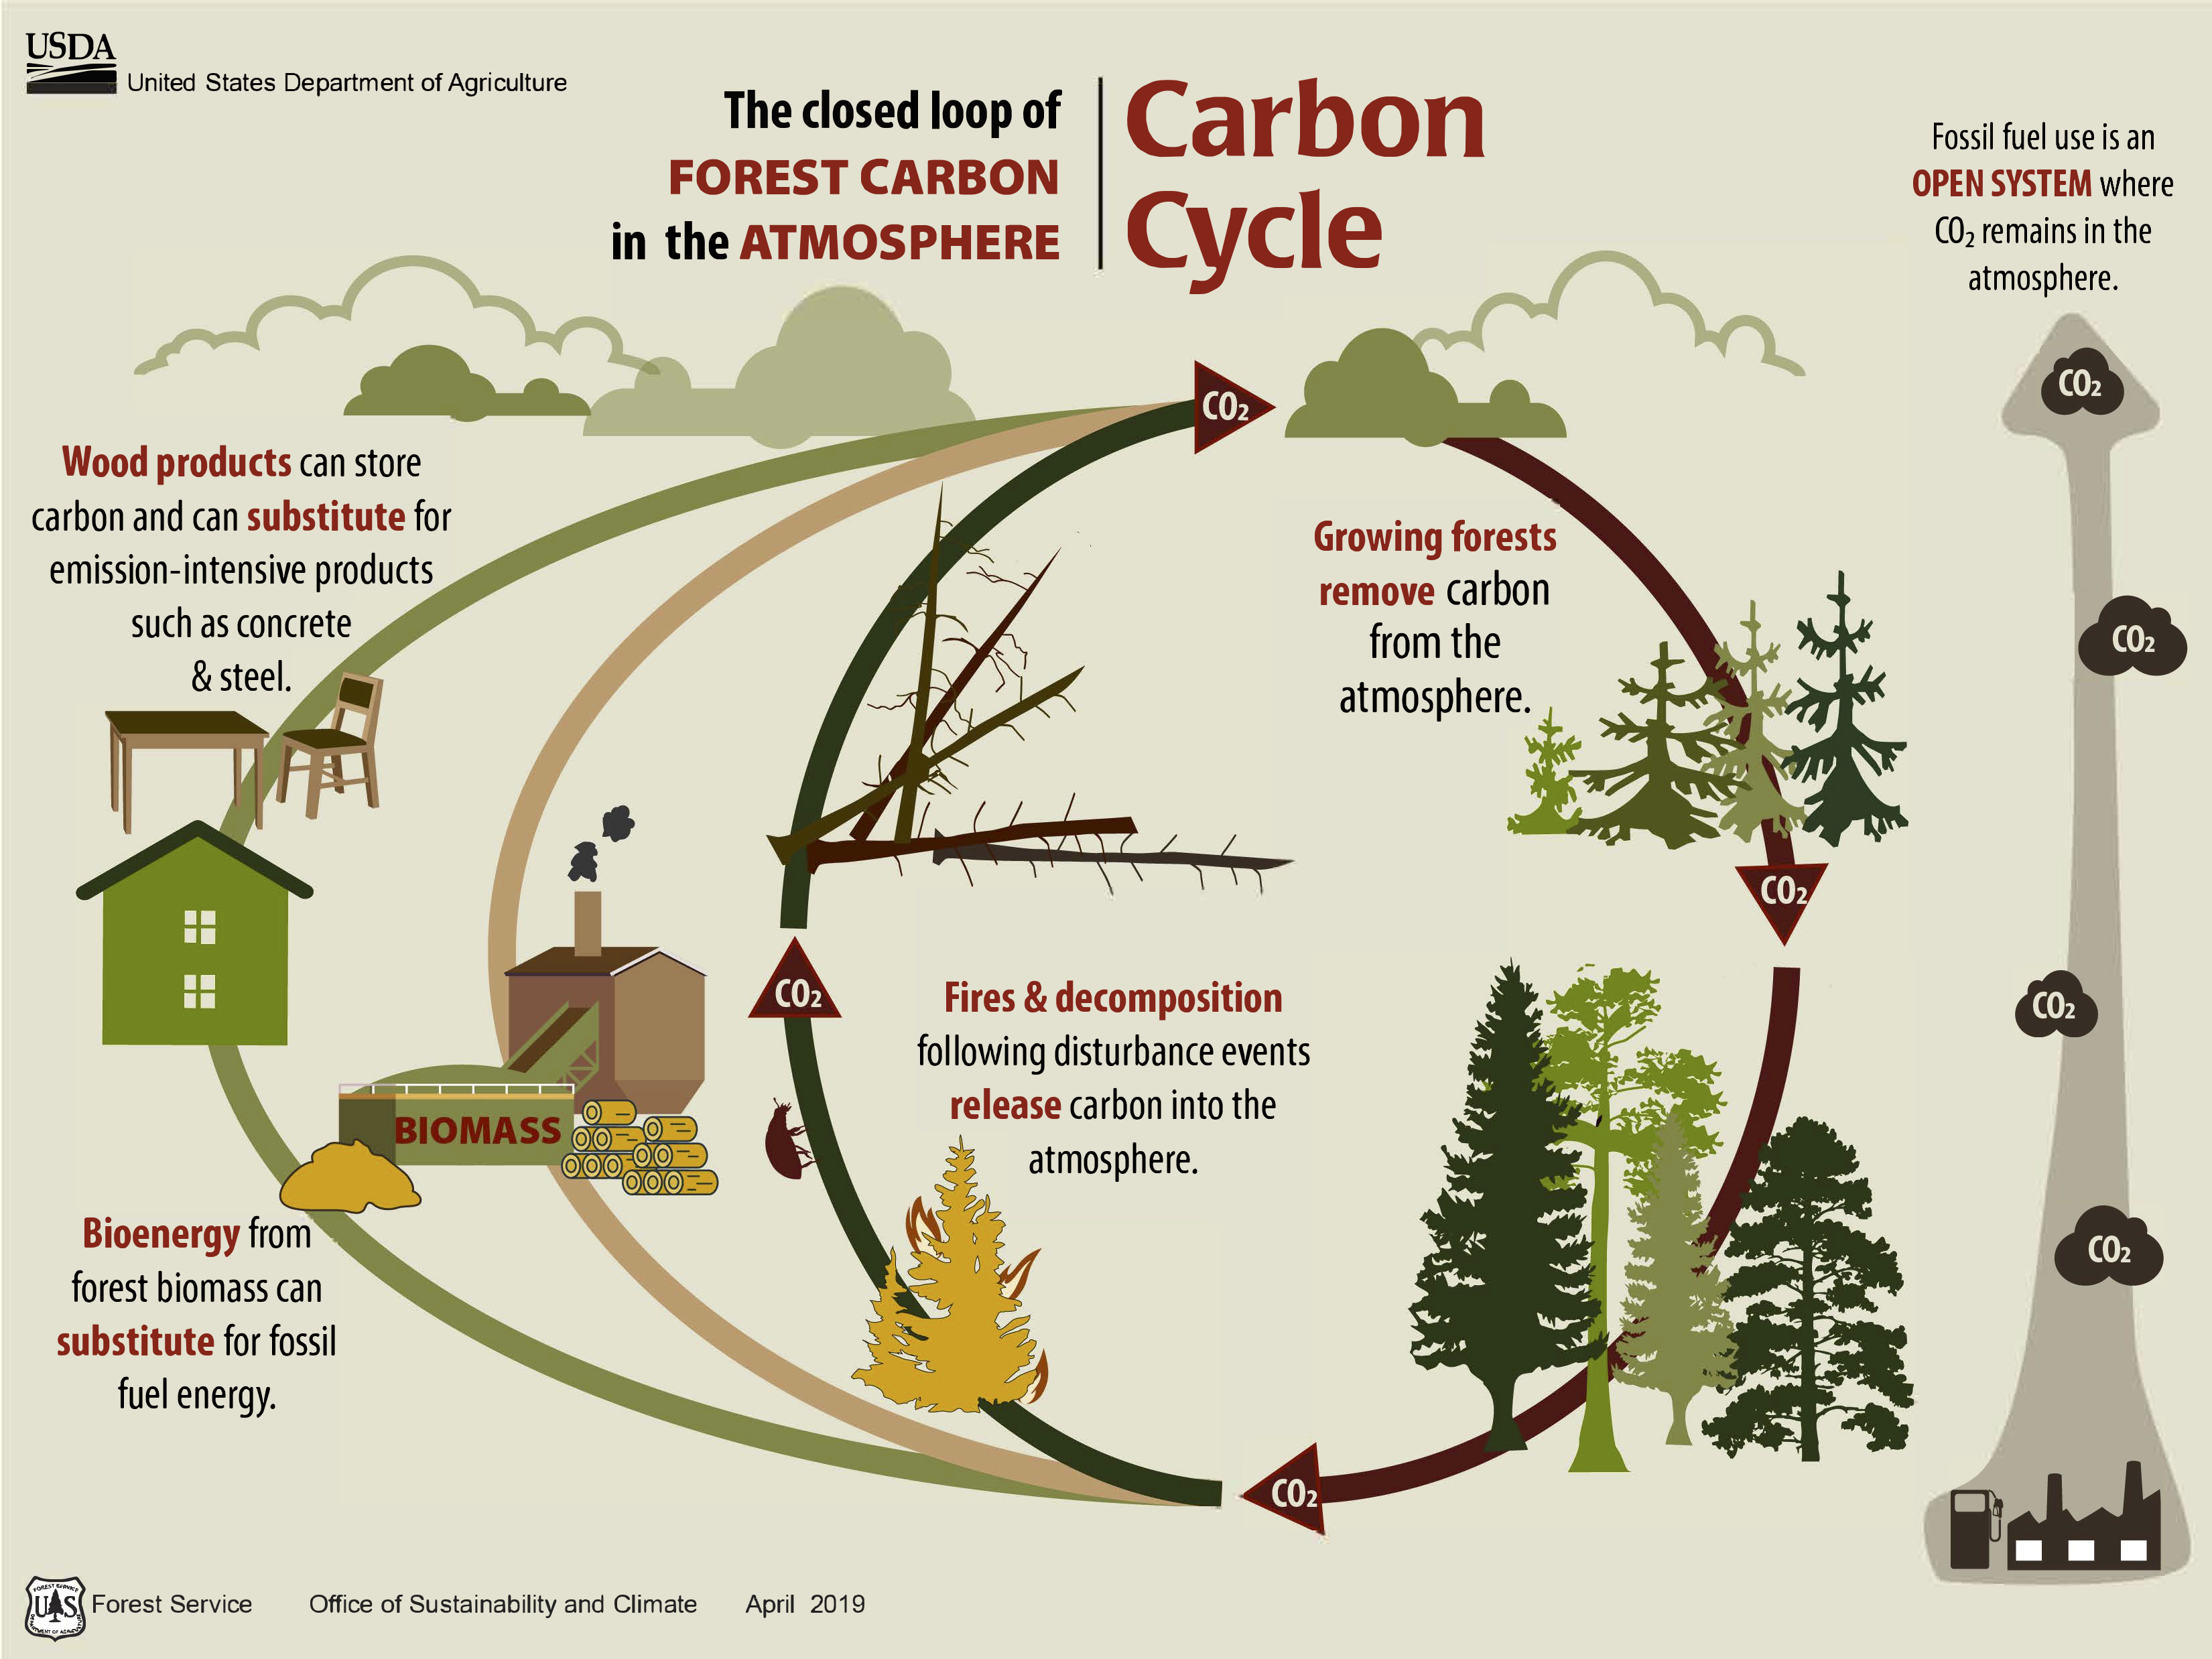 Carbon Cycle Figure